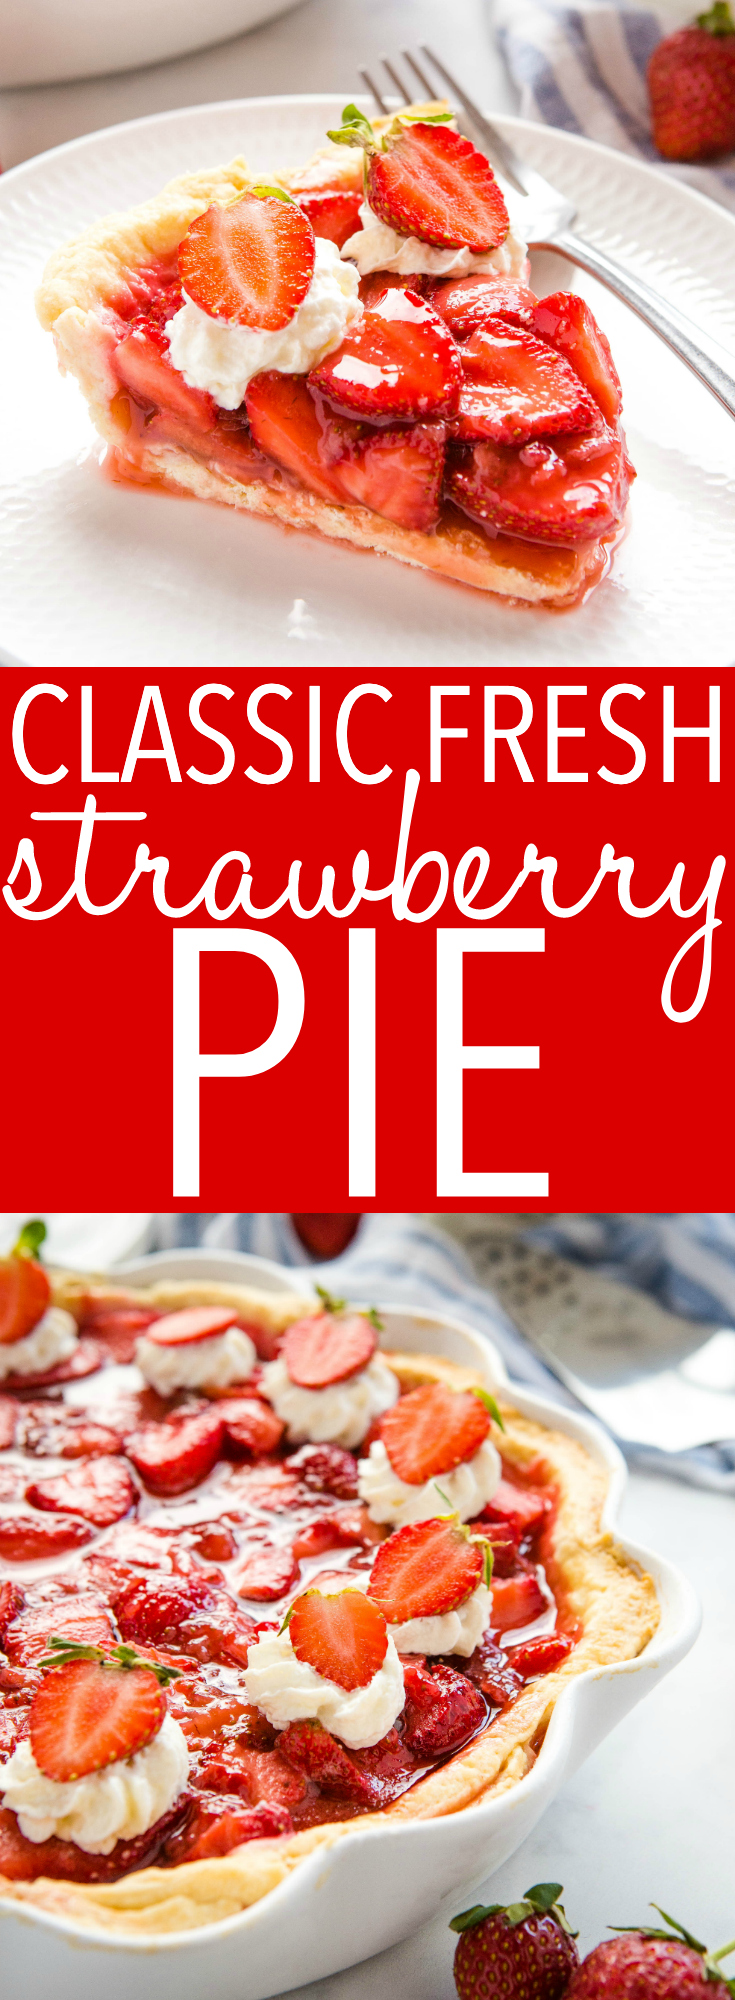 This Classic Fresh Strawberry Pie is an old family recipe for the perfect easy summer dessert! It's packed with fresh strawberries and made with an easy trick for the perfect juicy slice every time! Recipe from thebusybaker.ca! #strawberrypie #strawberry #dessert #pie #homemade #nobake #berries #barbecue #party #family via @busybakerblog